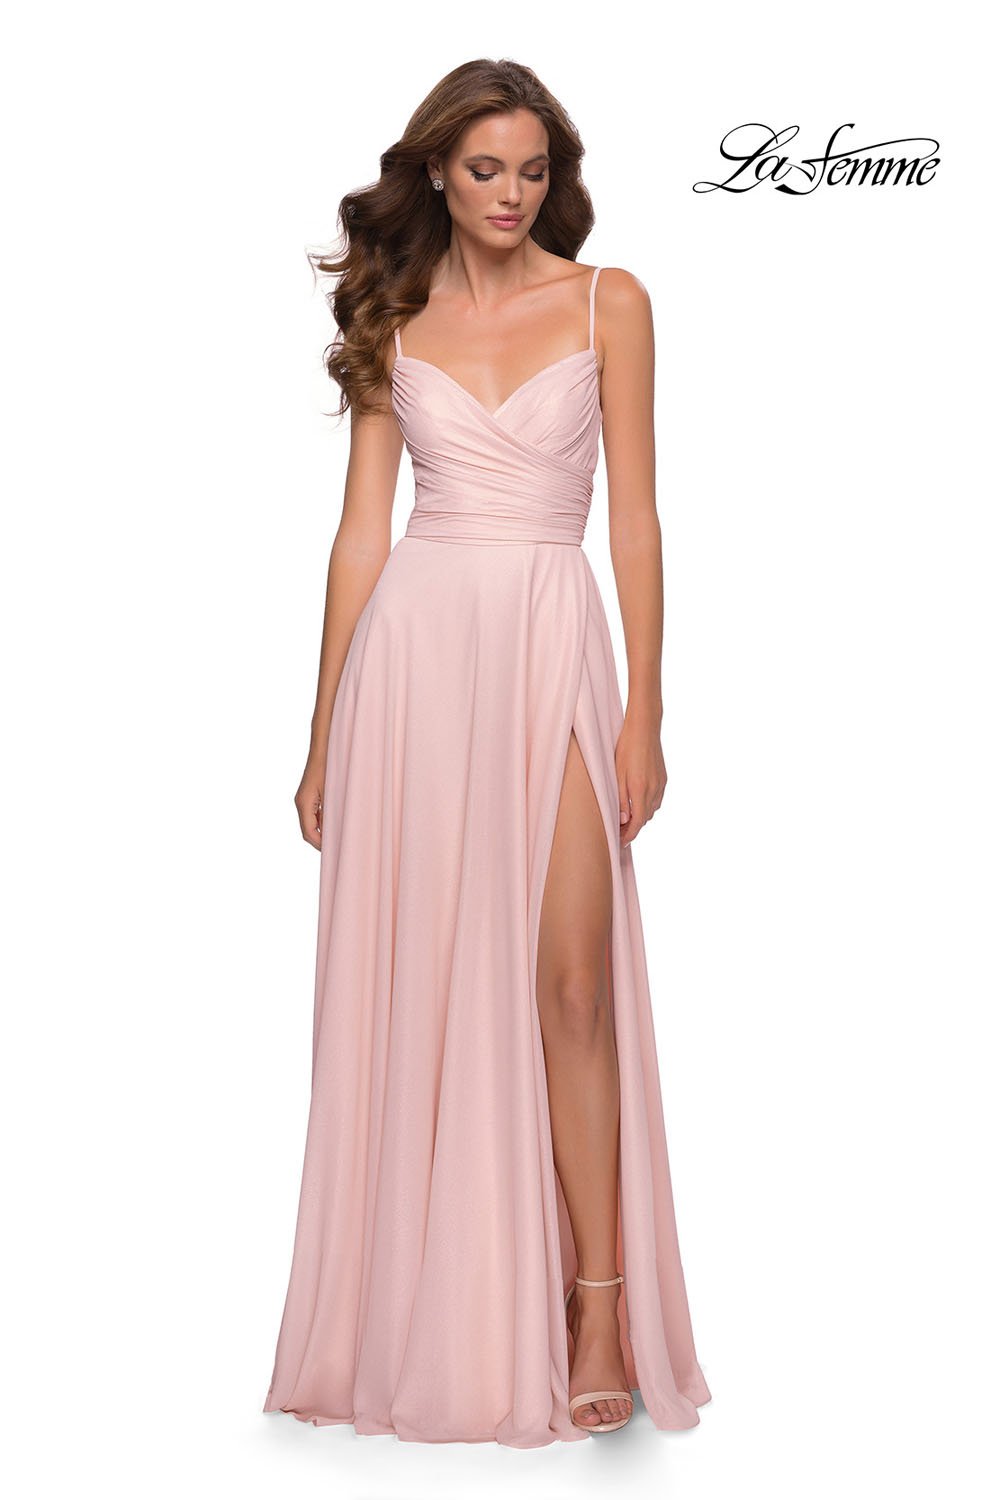 le chateau, Dresses, Le Chateau Plus Size Blush Pink Rose Gold Champagne  Fit Flare Prom Summer Dress